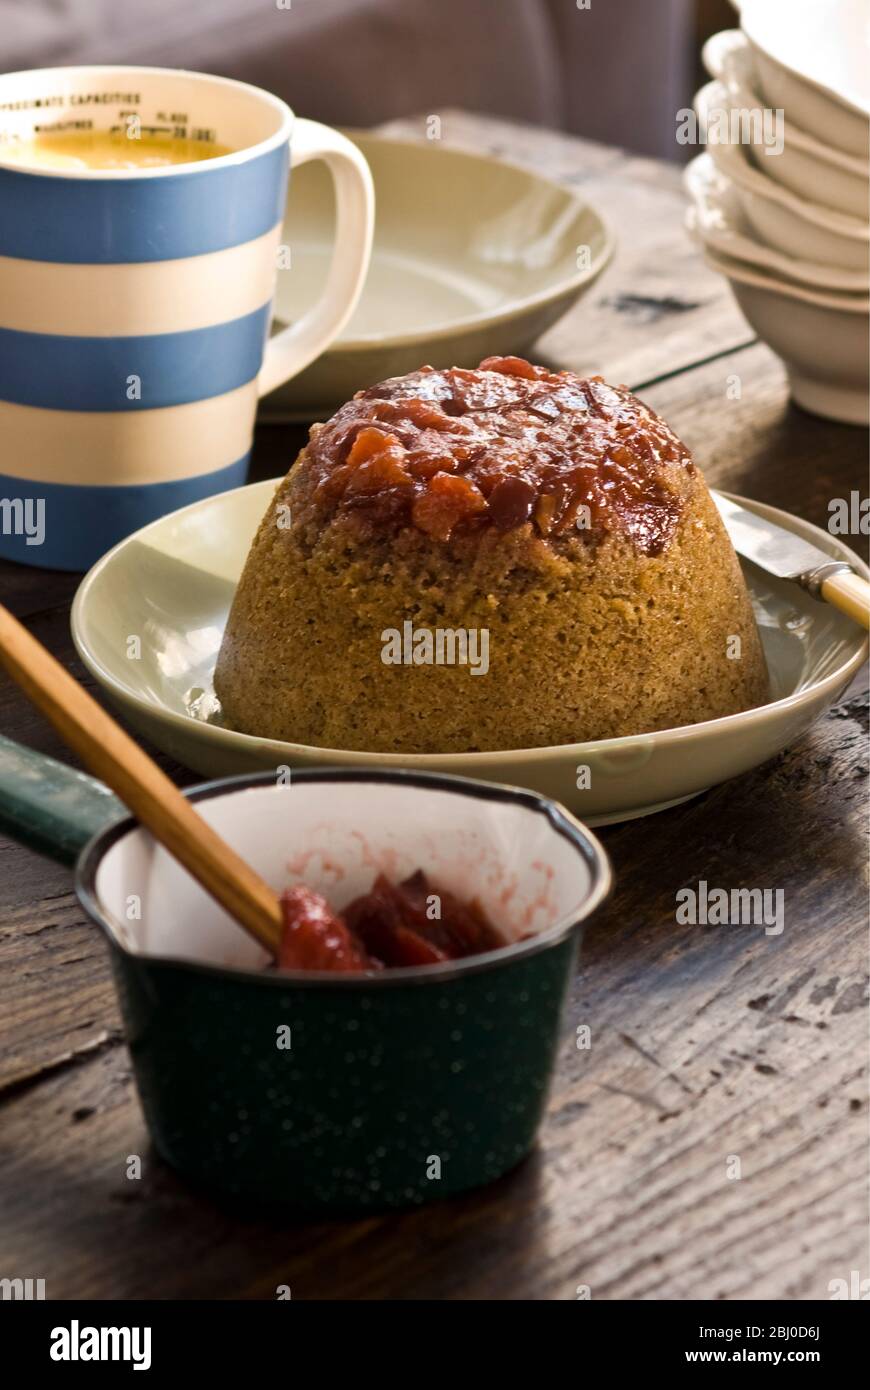 Traditional steamed sponge pudding with walnits and rhubarb compote and custard, served in informal setting - Stock Photo